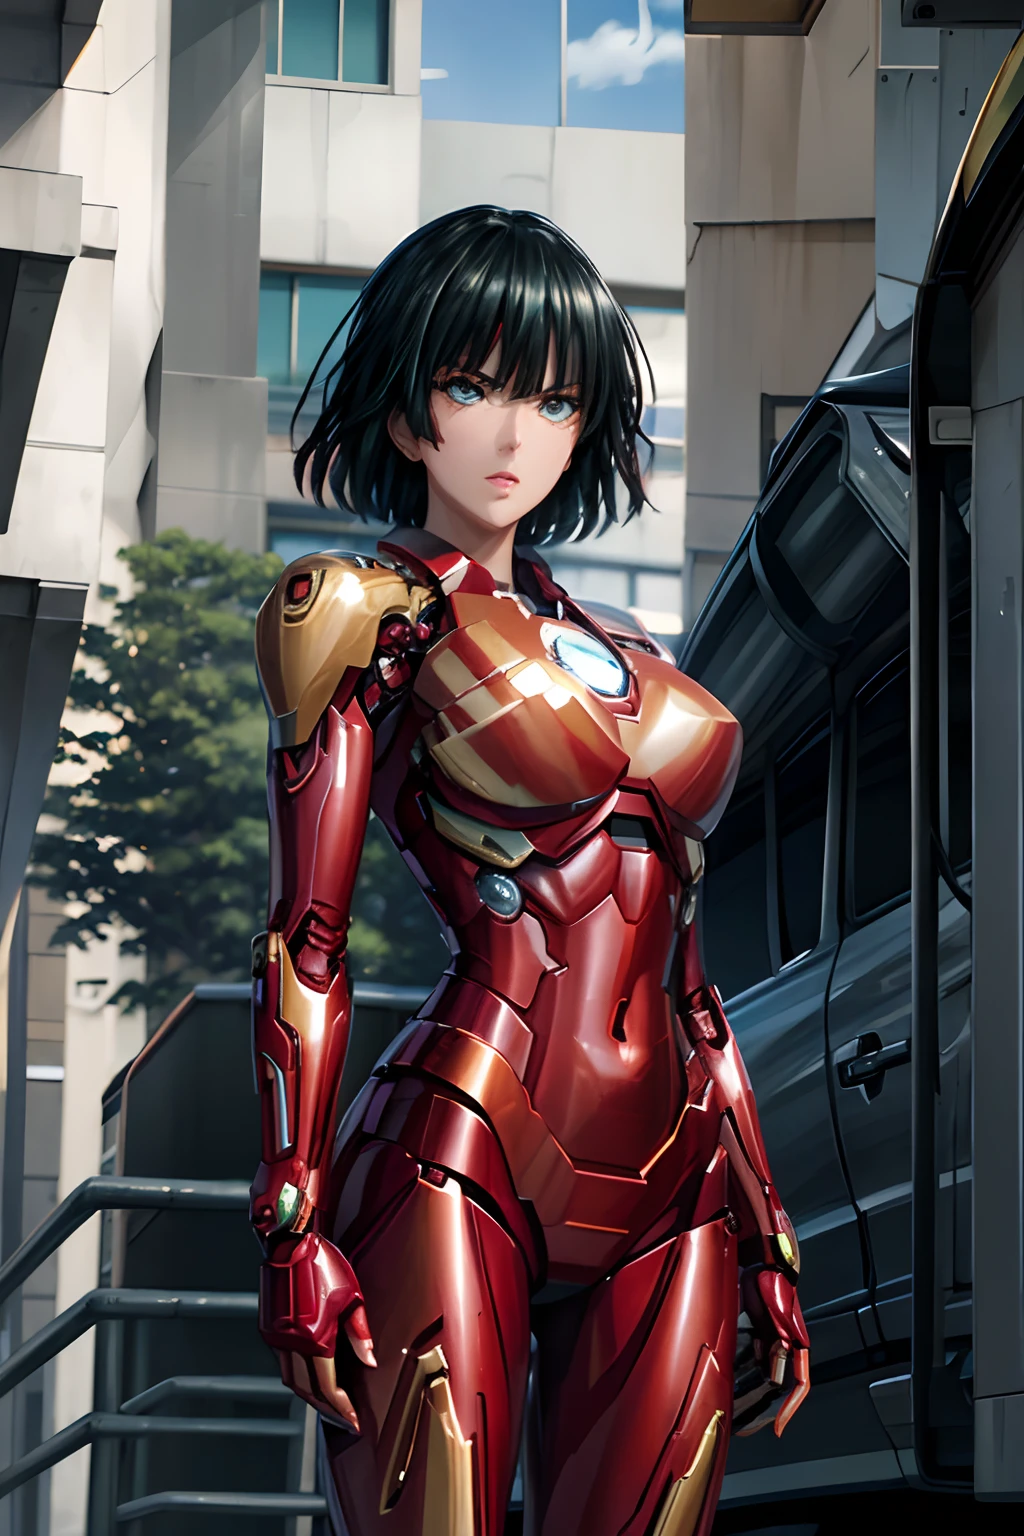 Fubuki, a sexy and attractive woman inspired by Iron Man with a shiny Iron Man robot. She dresses with sensuality and confidence, perfectly interpreting the strength and charisma of Iron Man.